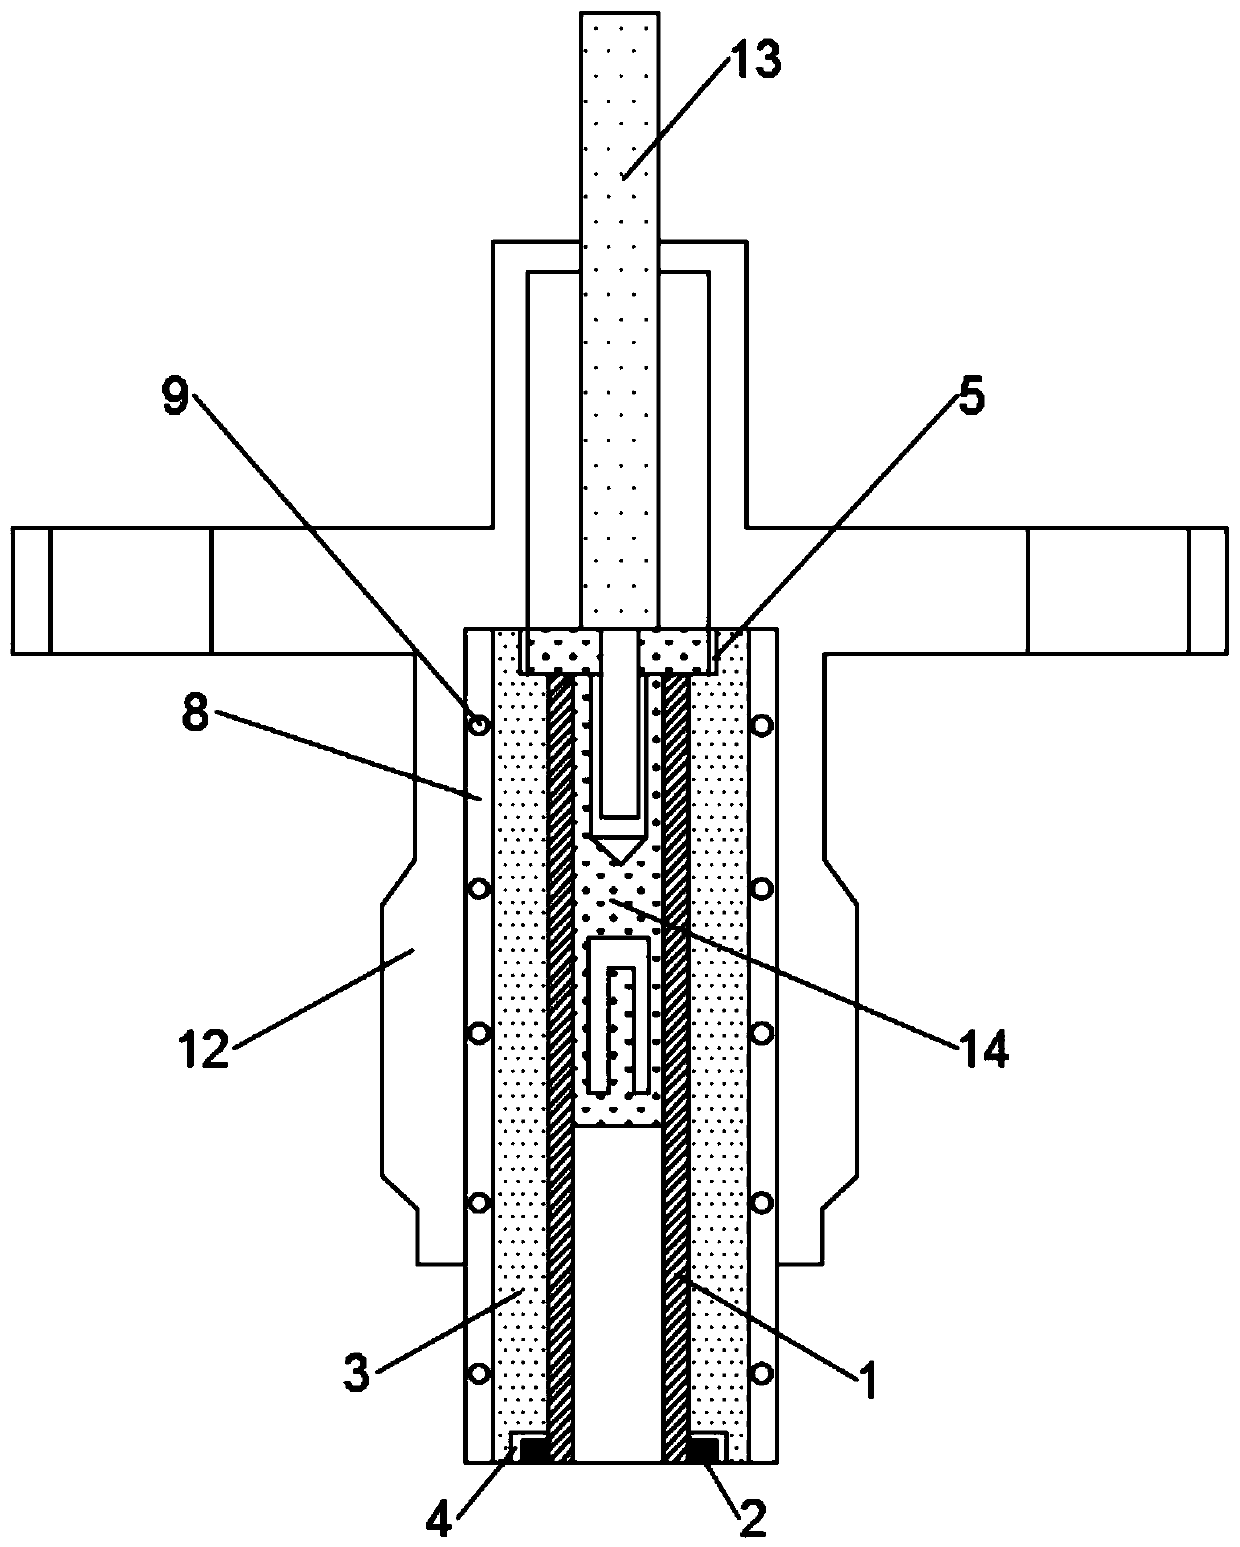 A semi-rigid cable welding void rate control method and supporting tooling